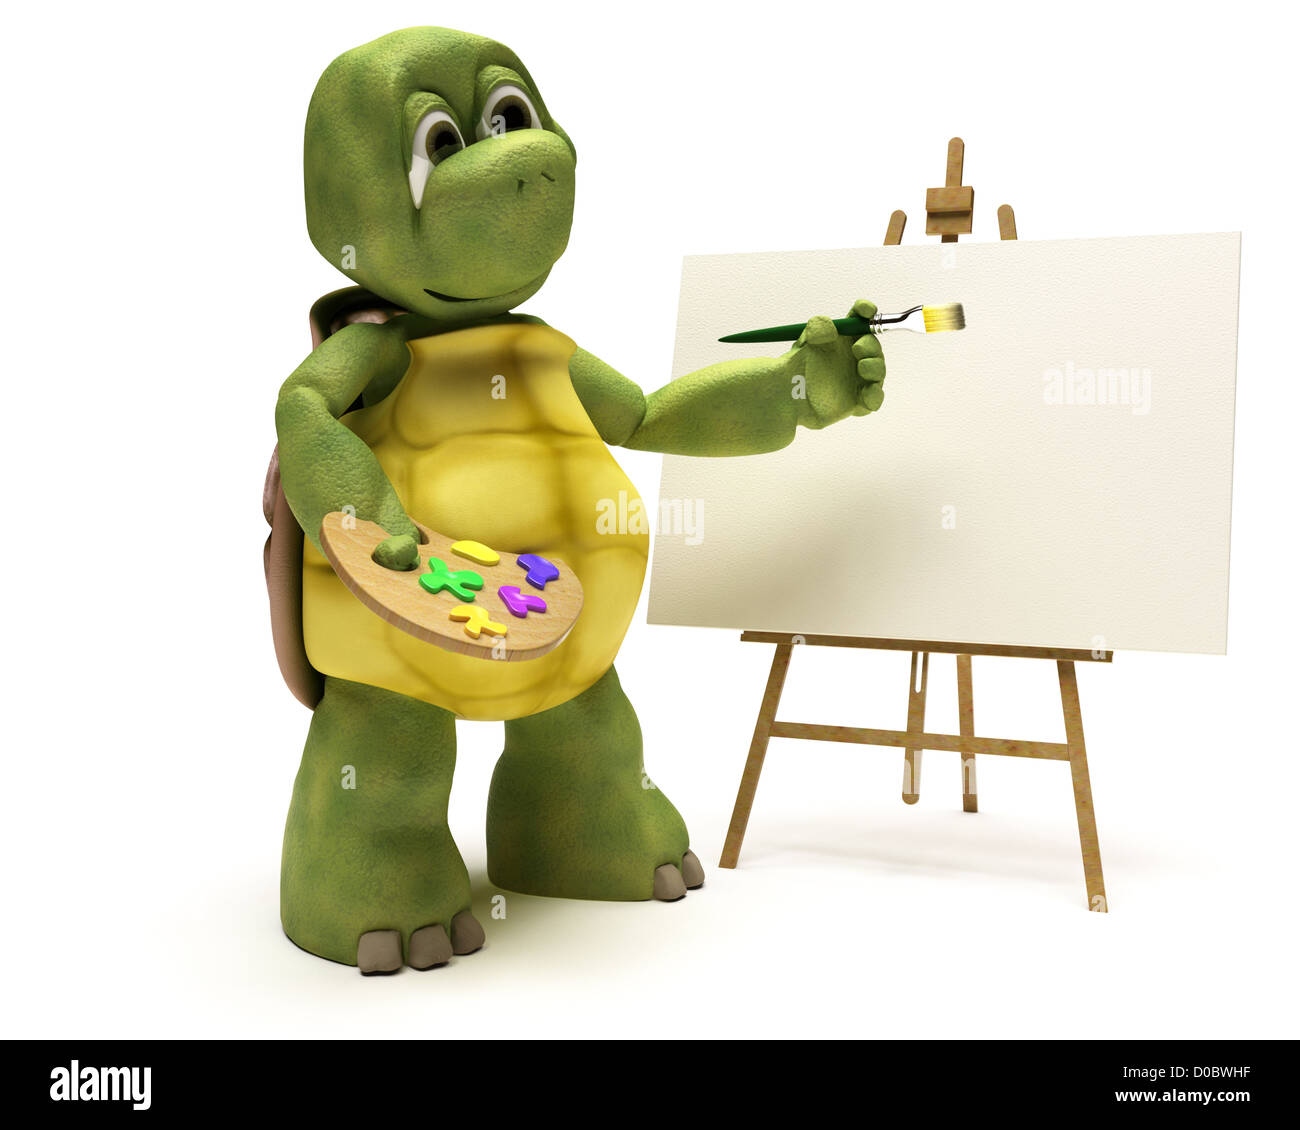 3D Render of a Tortoise painting Stock Photo